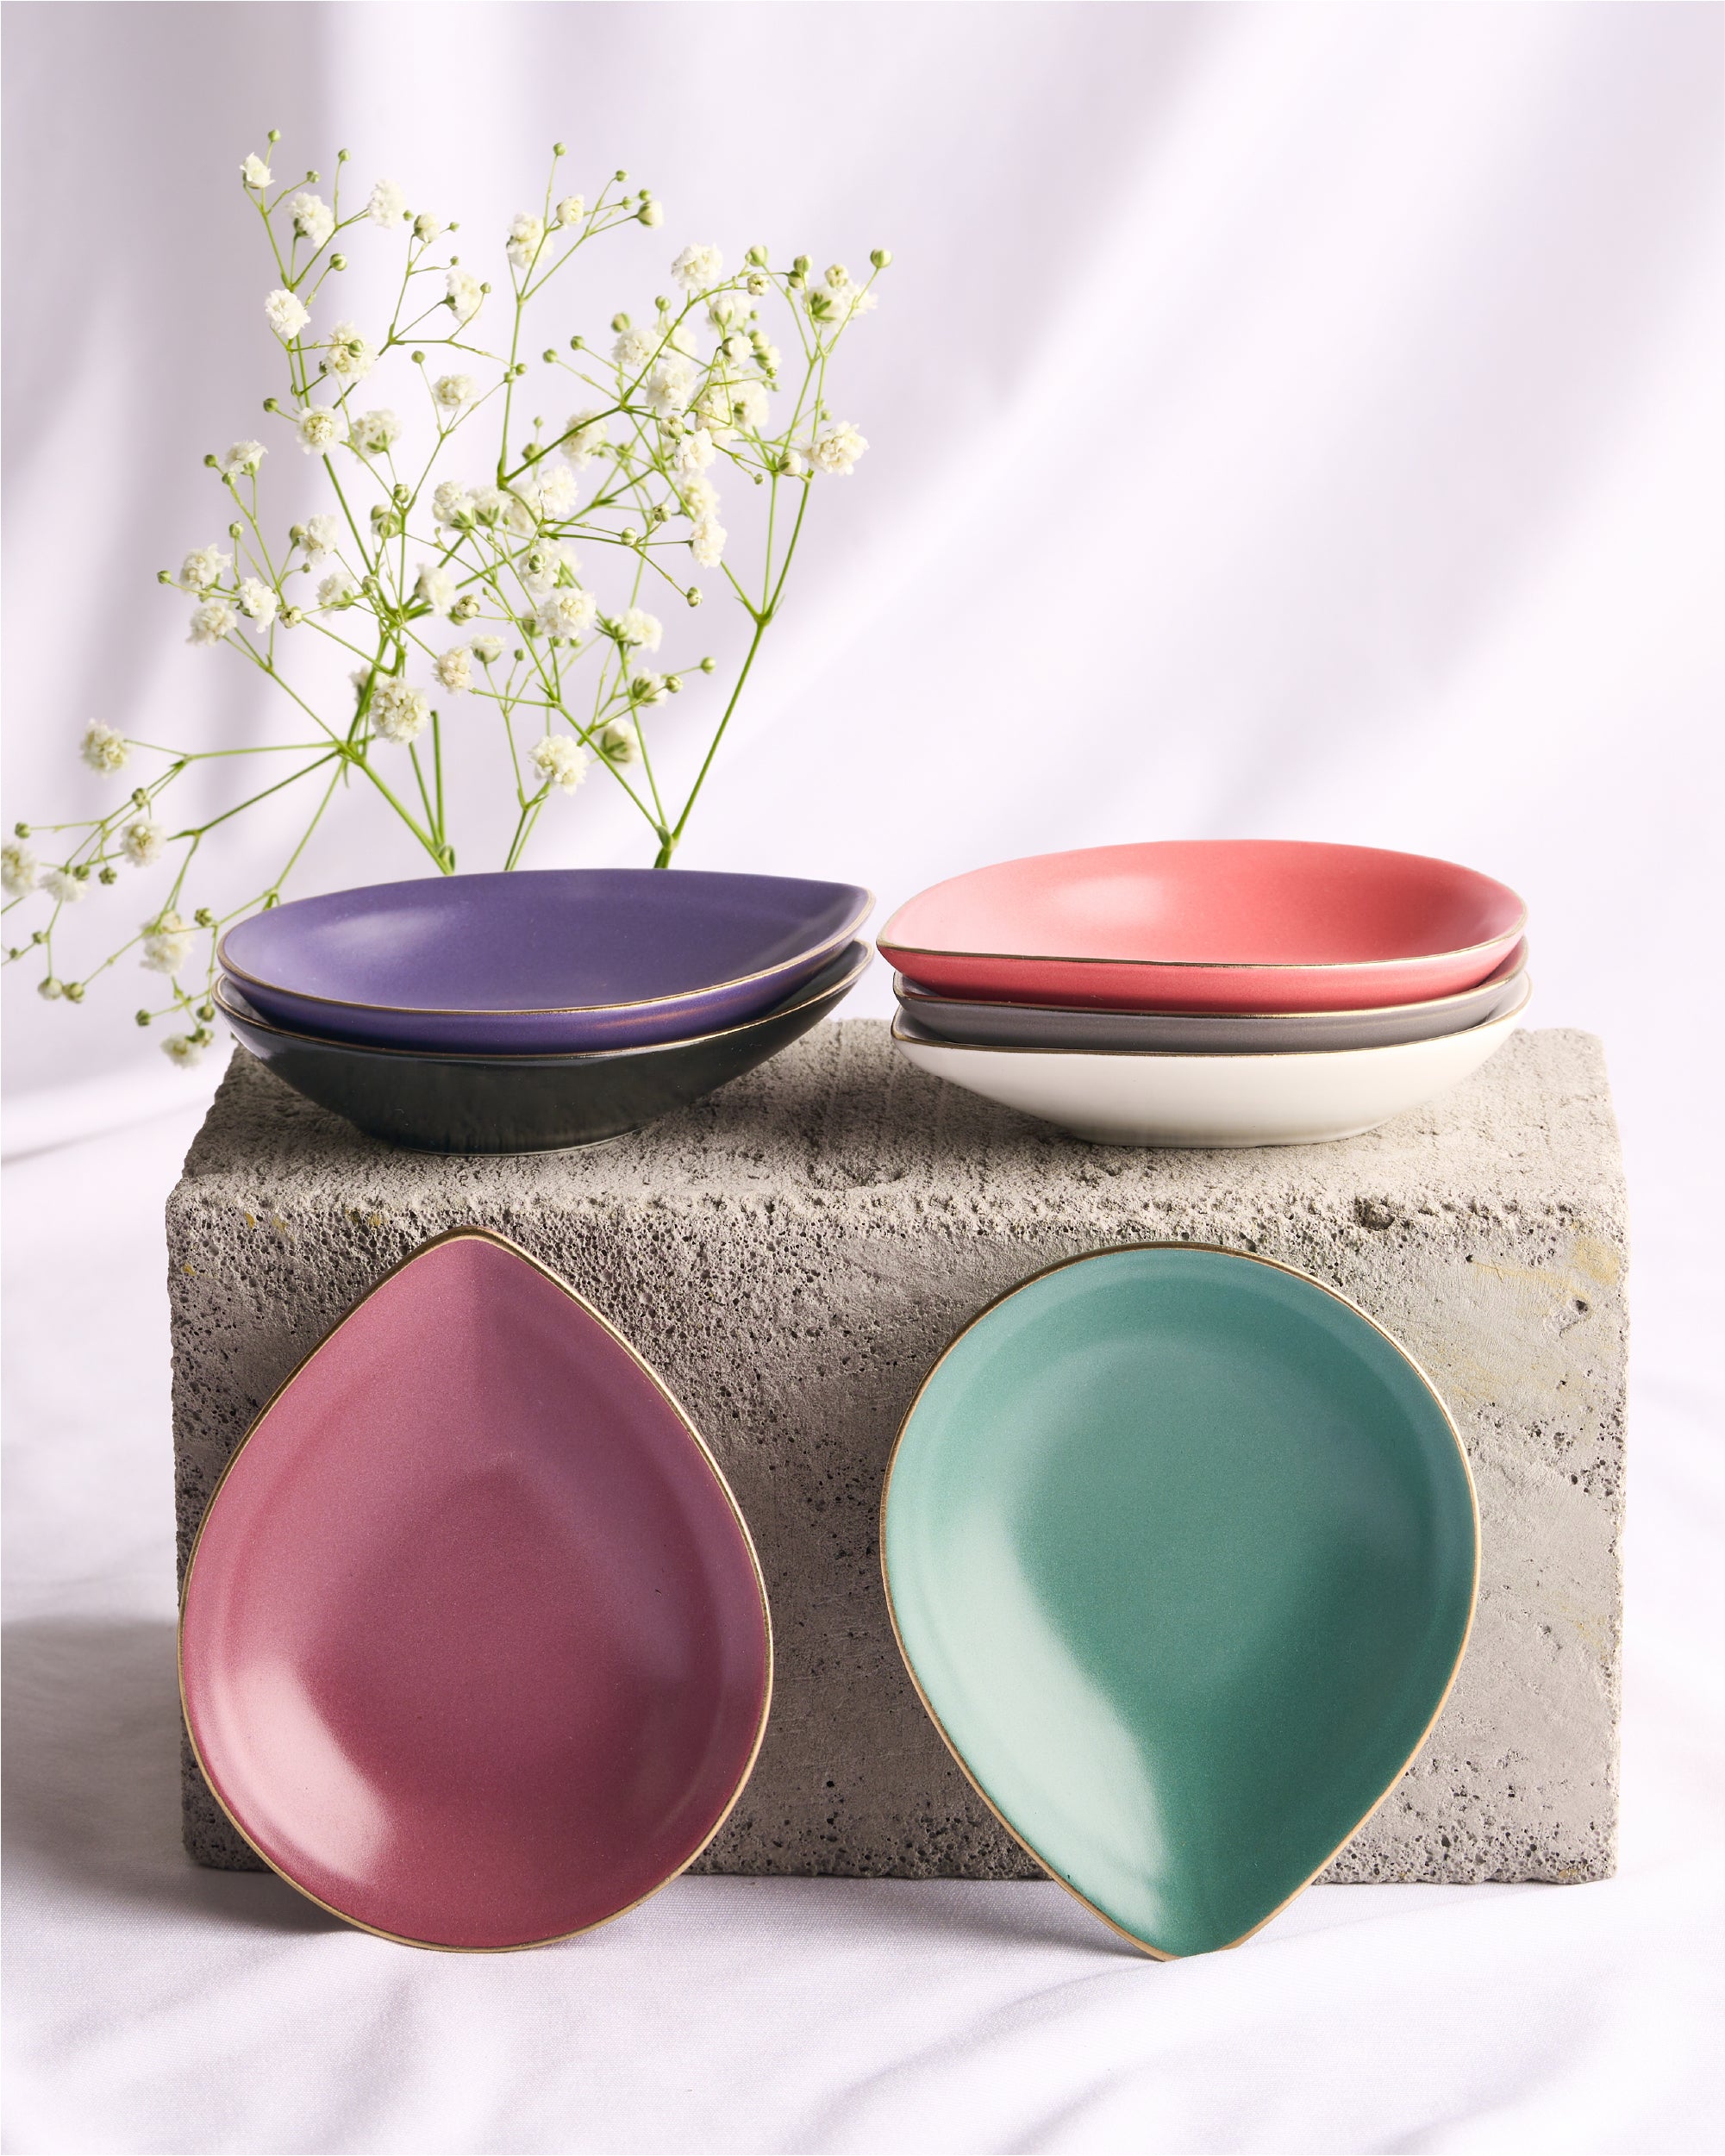 Mix Colors || Bloom Vegas Acute Shaped Dish - Contemporary Elegance for Culinary Creations - Vola Global